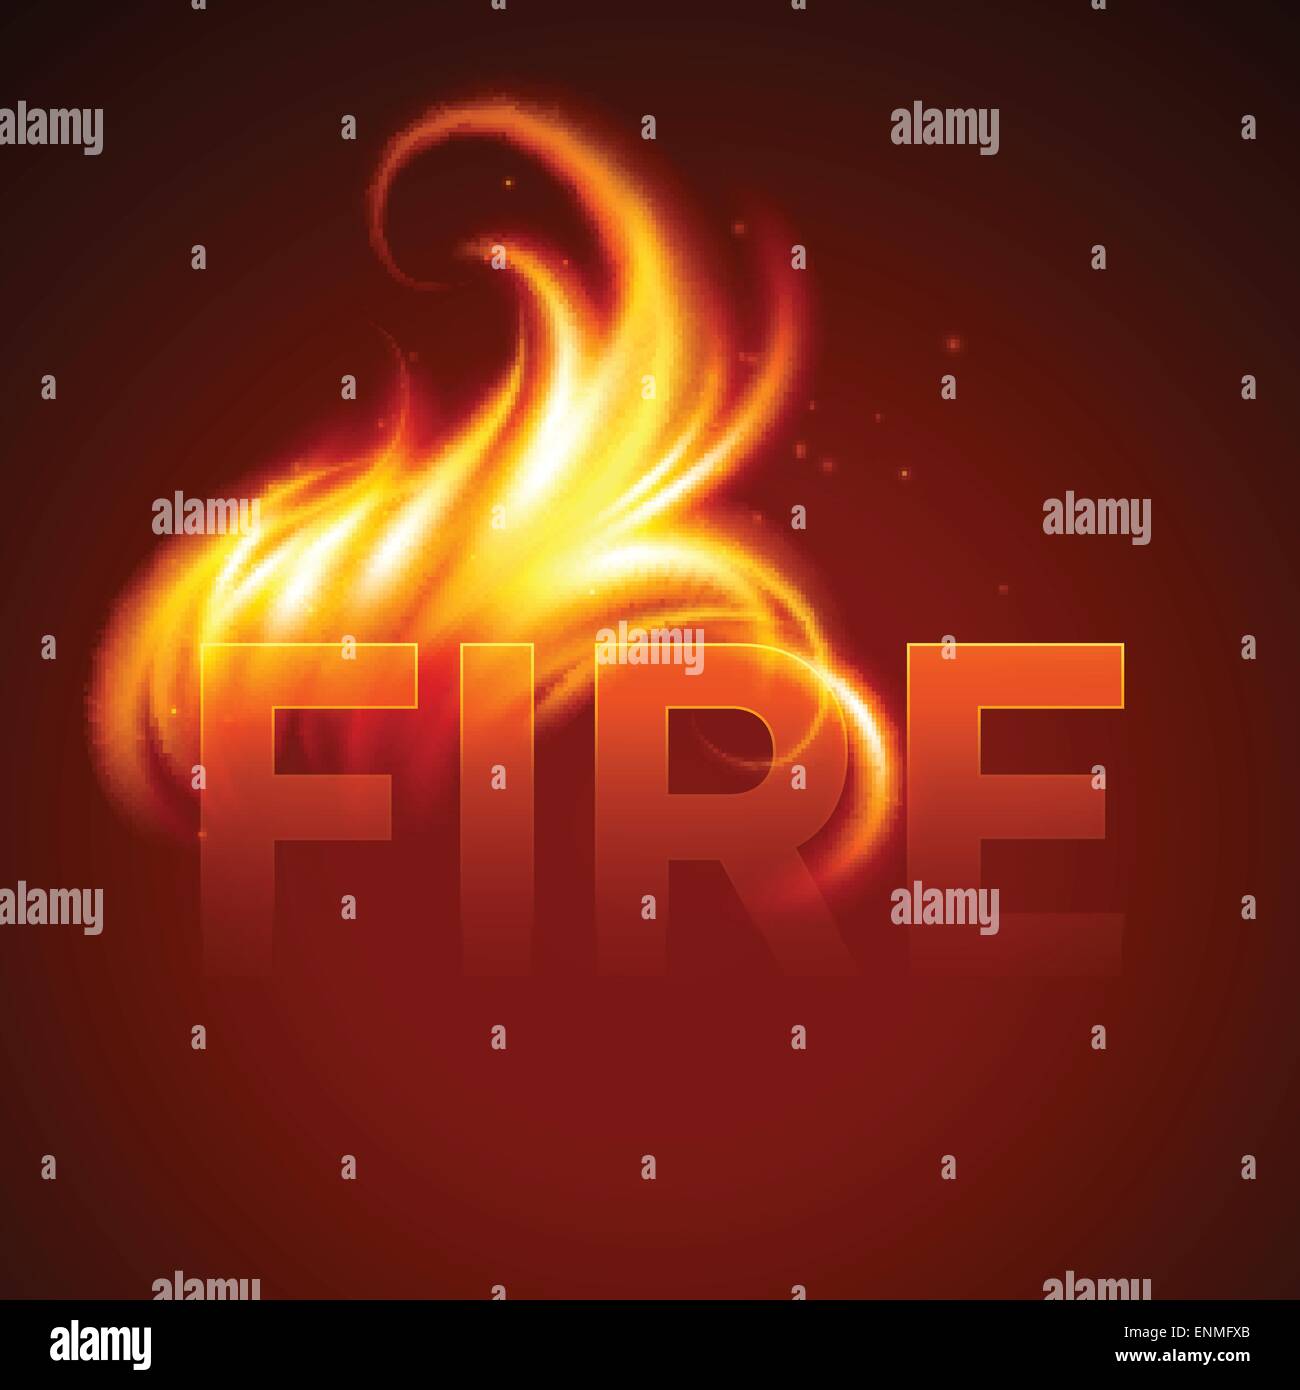 Anime Fire text flame burning hot lava explosion background. Stock